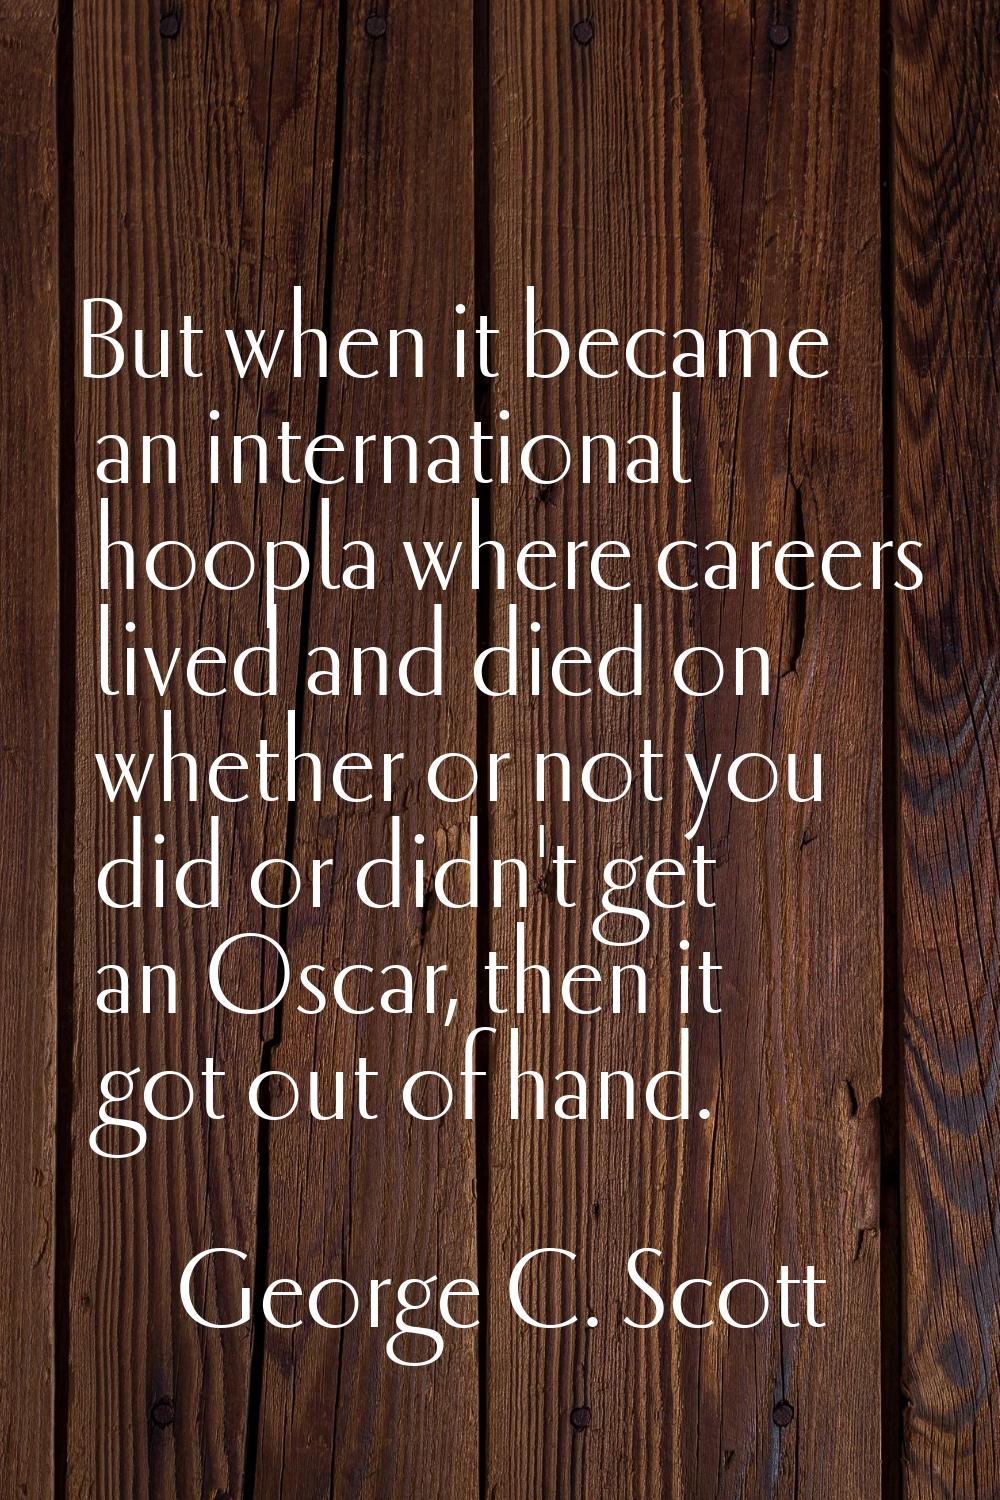 But when it became an international hoopla where careers lived and died on whether or not you did o